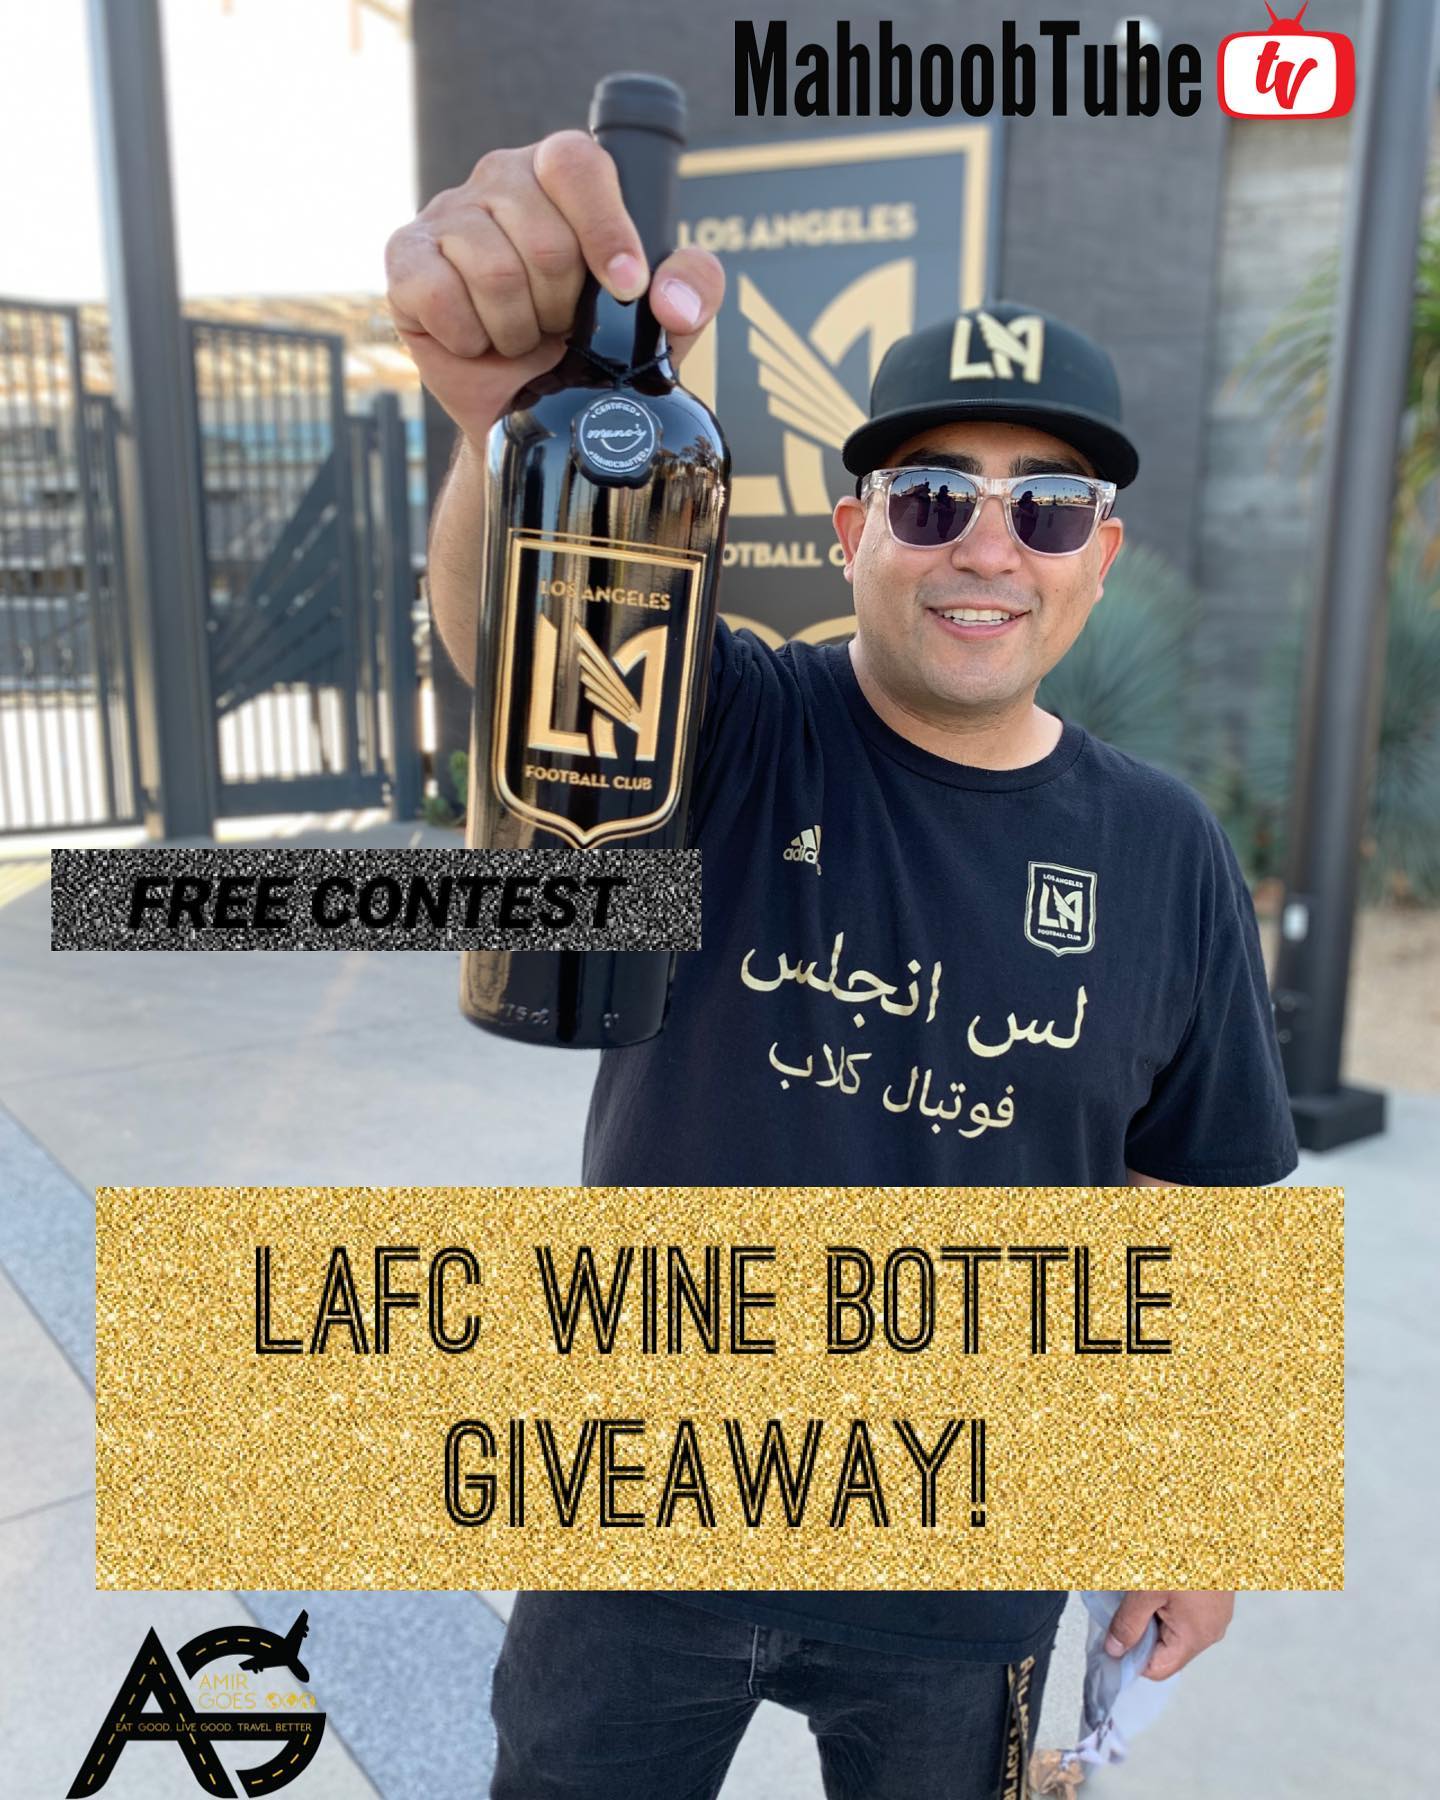 Free Contest Rules, You Must do ALL 3 to be entered:
Follow @AmirGoes24
Subscribe on YouTube  to  MahboobTubeTV 
 Go to amirgoes.com , click on the Exclusive offers tab, and complete the form! (Link in bio) 

Easy Peasy! Just in time for the Holidays, this LAFC wine bottle by @manoswine could be yours! 

Winner will be announced on Saturday, Nov 21st at 1:20 pm pt right here on my Instagram Live ! Good luck everyone! 

⁣
.⁣
.⁣
.⁣
.⁣
.⁣